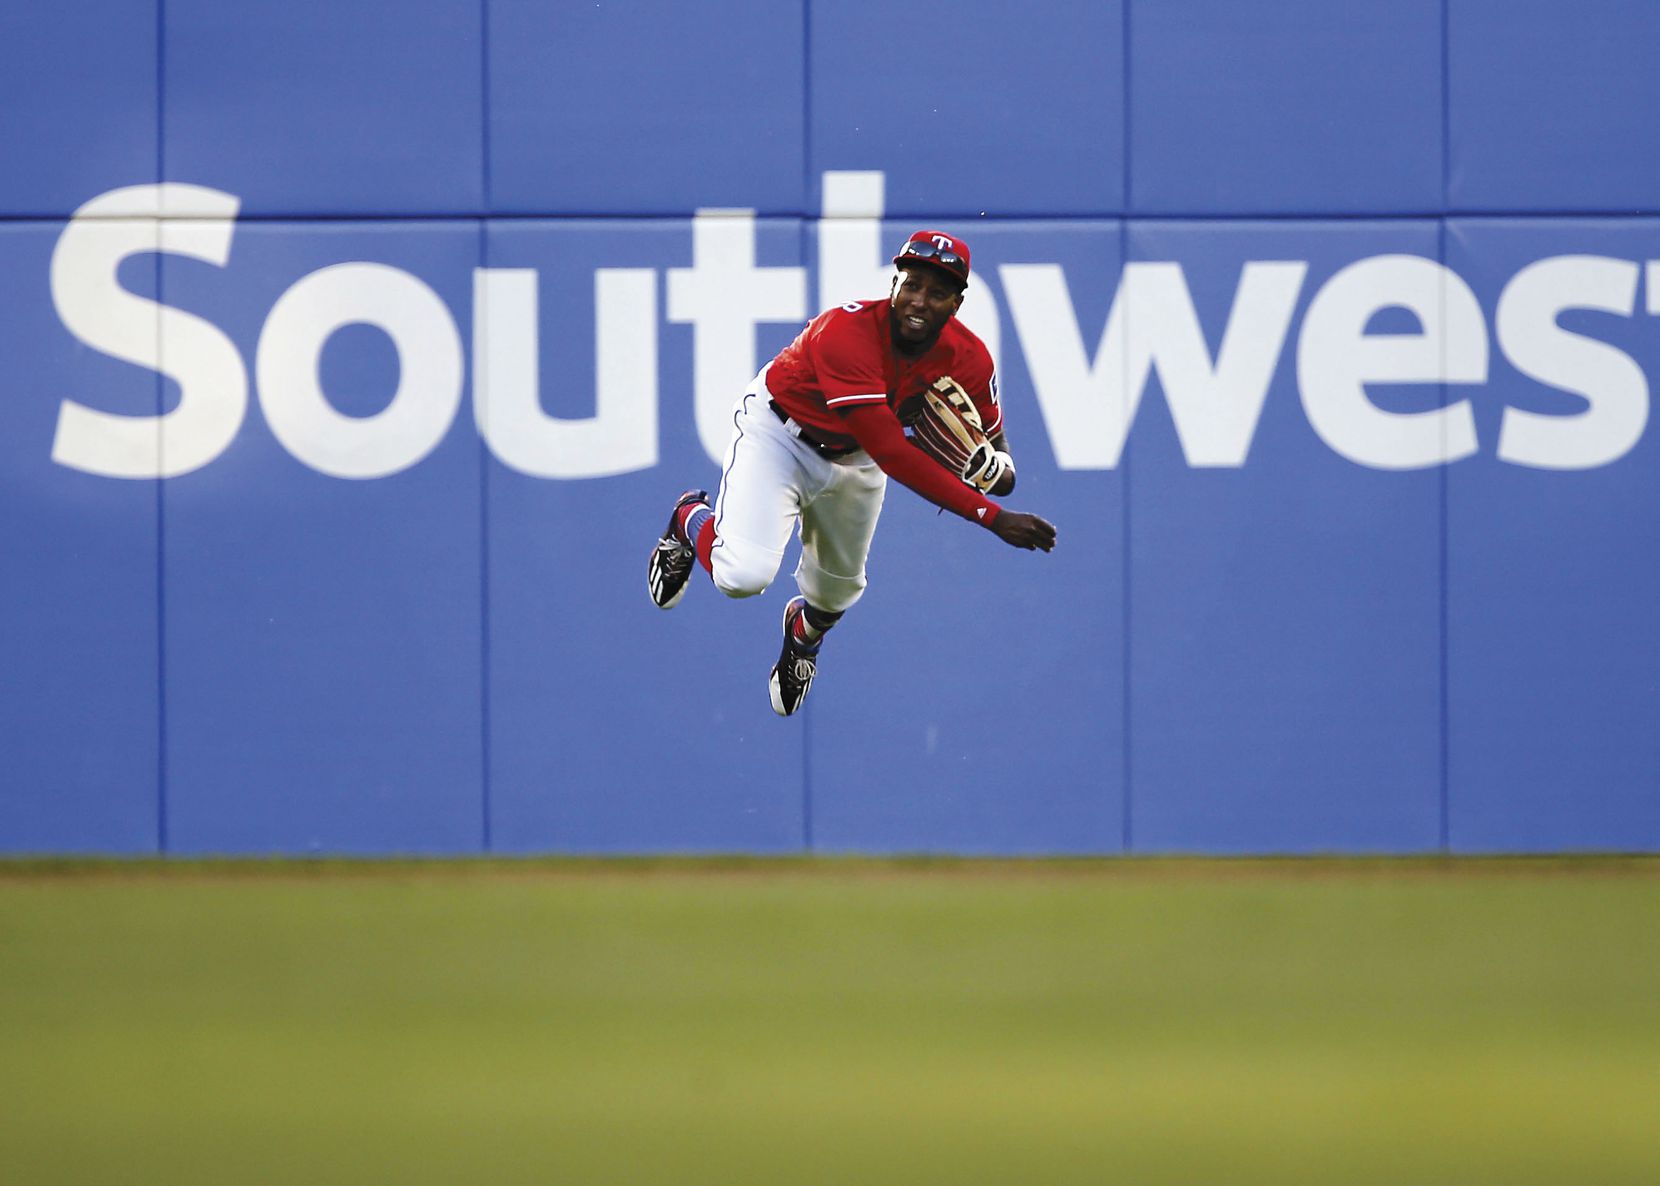 Rangers left fielder Jurickson Profar goes flying to return a ball in the third inning against the Indians on Opening Day on April 3.